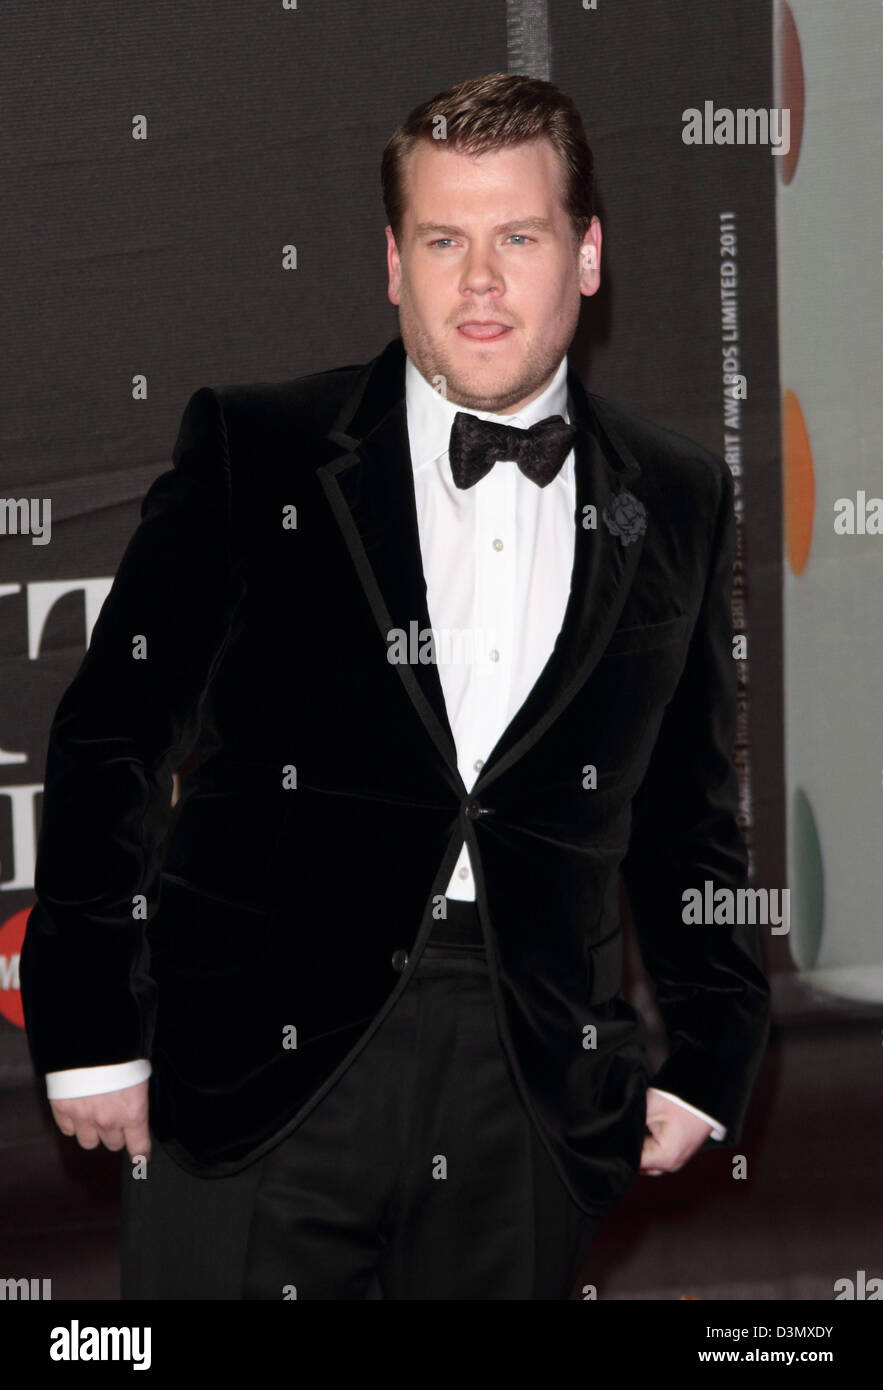 London, UK. 20th February 2013. James Corden at the The 2013 Brit Awards at the O2 Arena, London - February 20th 2013  Photo by Keith Mayhew/ Alamy Live News Stock Photo